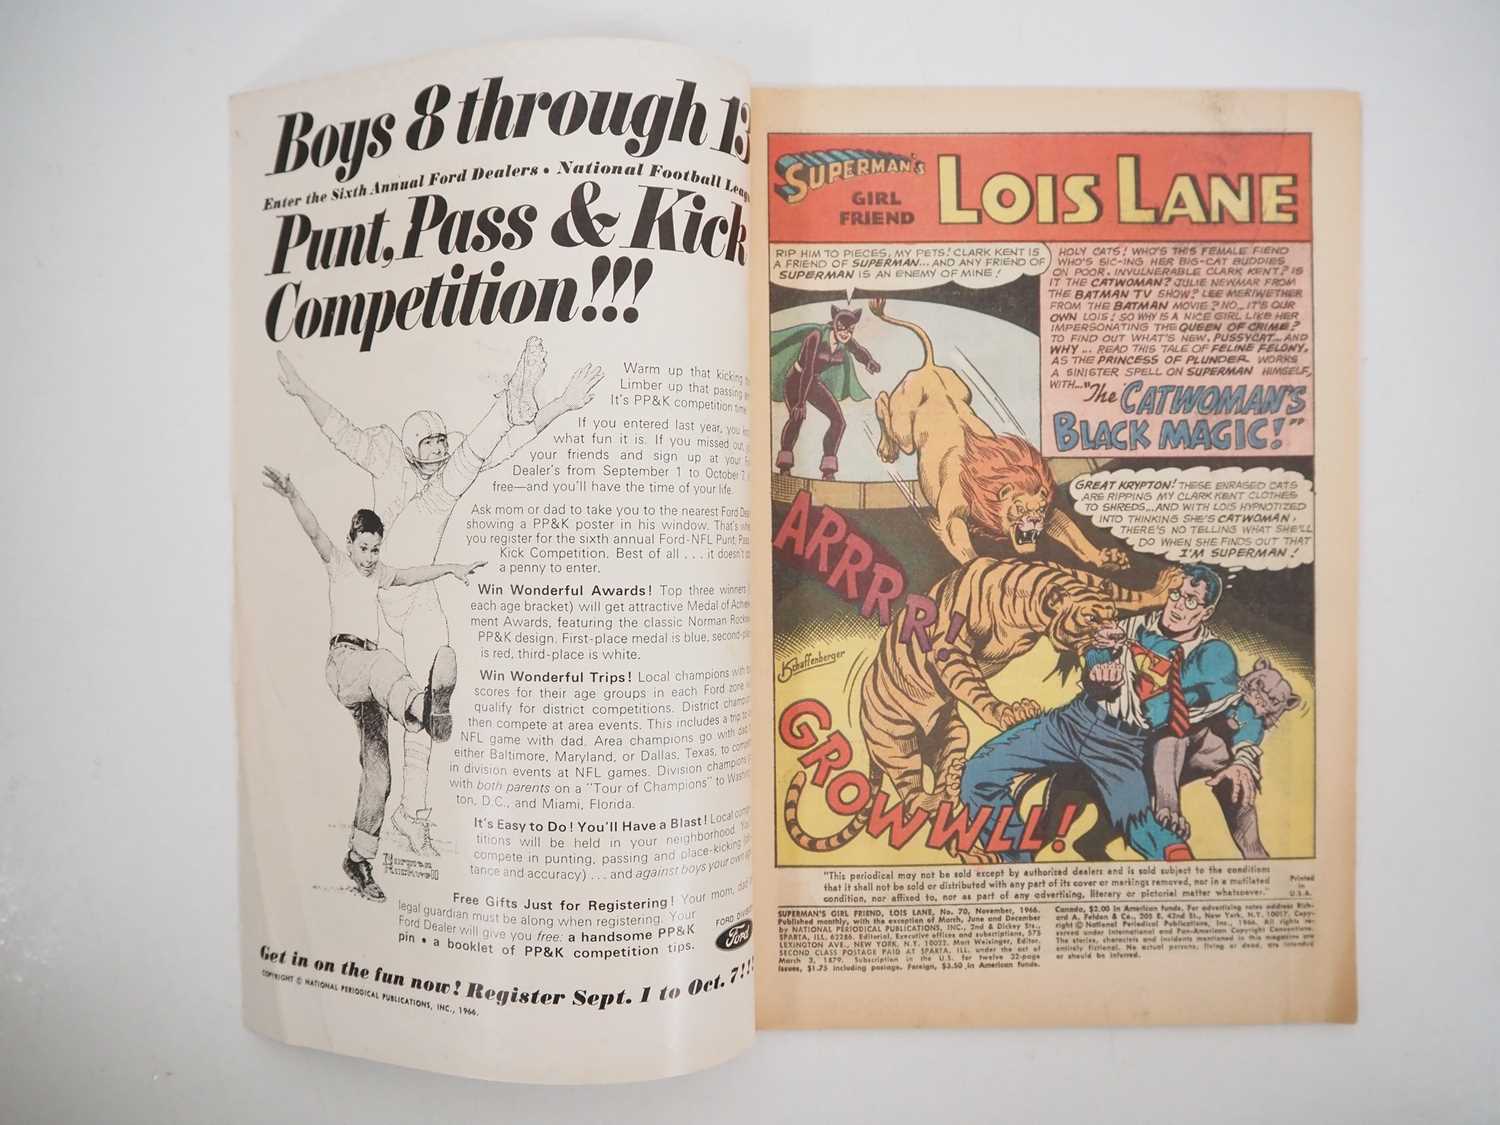 SUPERMAN'S GIRLFRIEND, LOIS LANE #70 (1966 - DC) - KEY Book - First Silver Age Catwoman appearance + - Image 3 of 9